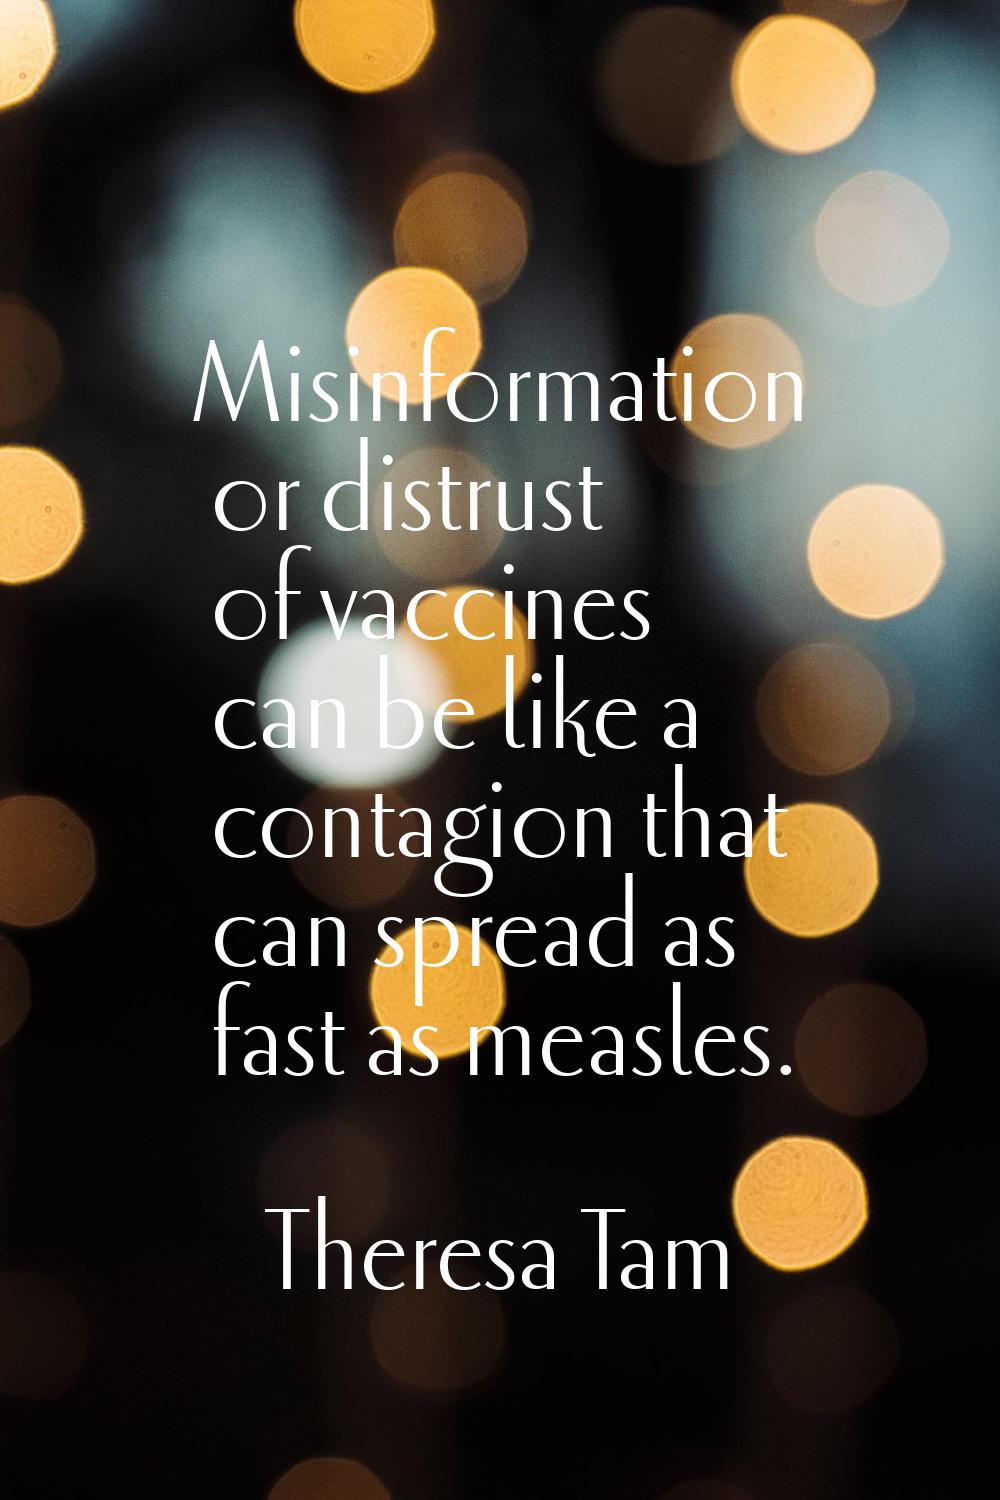 Misinformation or distrust of vaccines can be like a contagion that can spread as fast as measles.